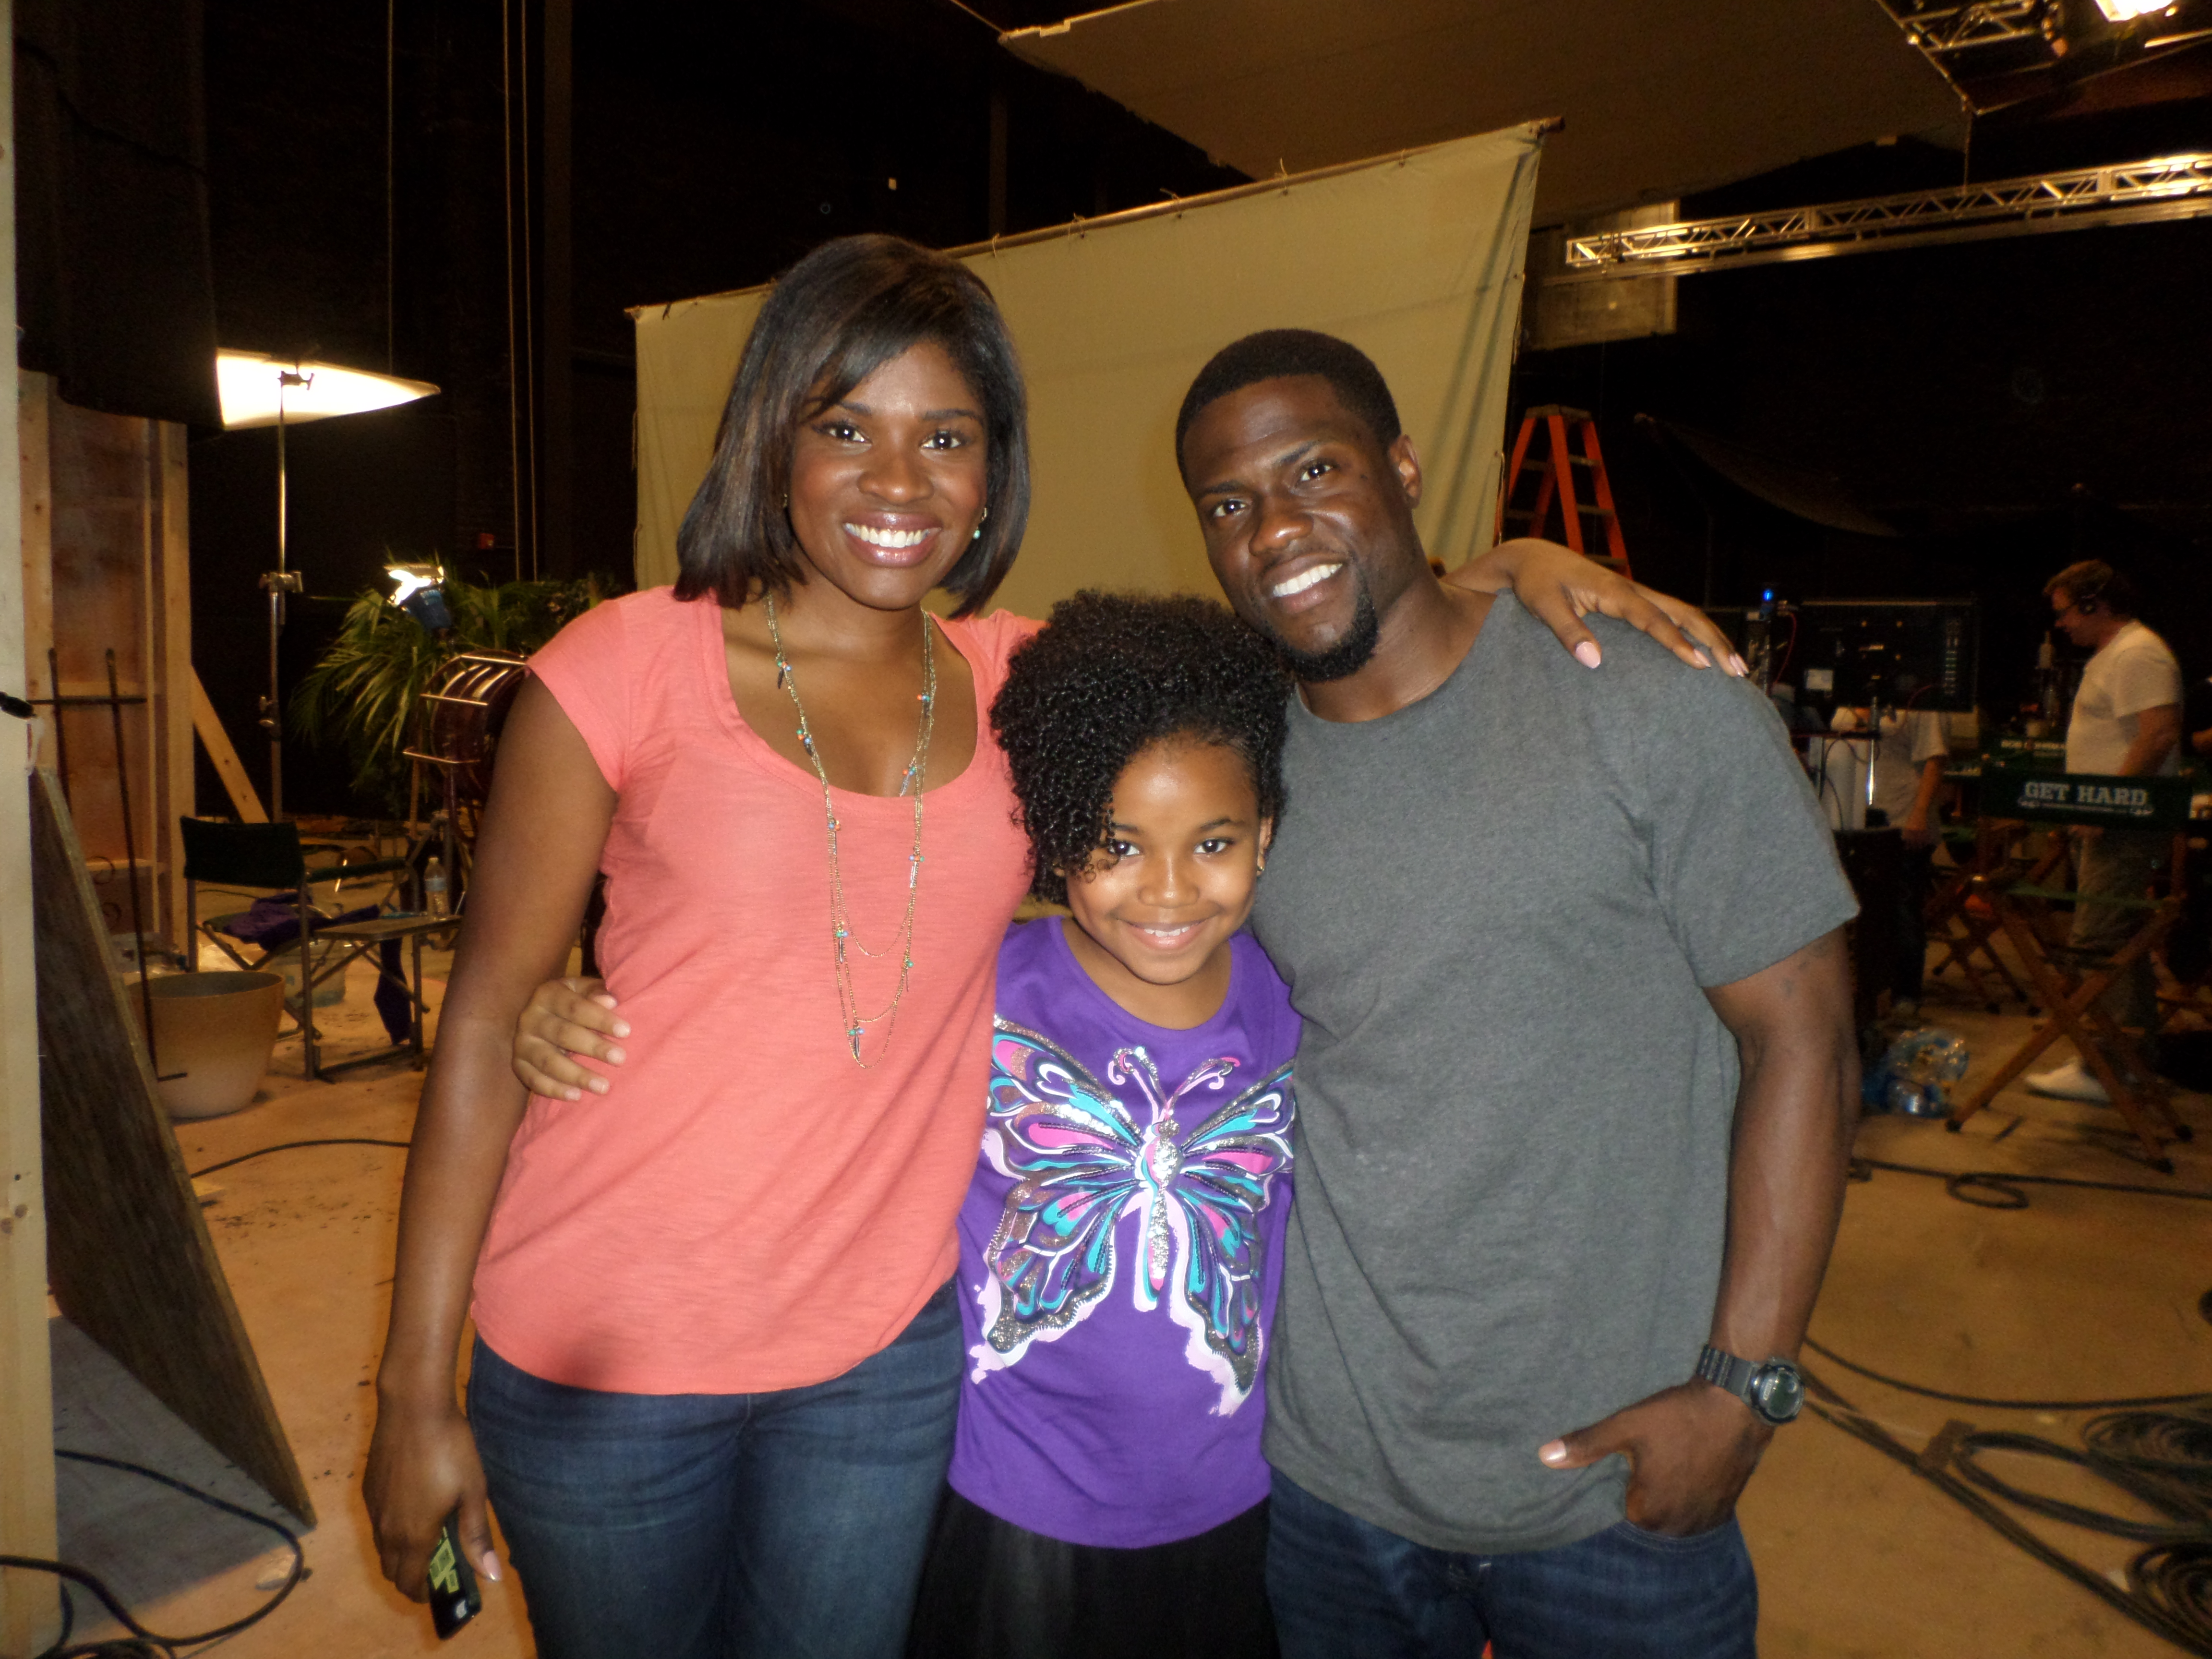 Ariana pictured with Kevin Hart and Edwina Findley on the set of Get Hard.